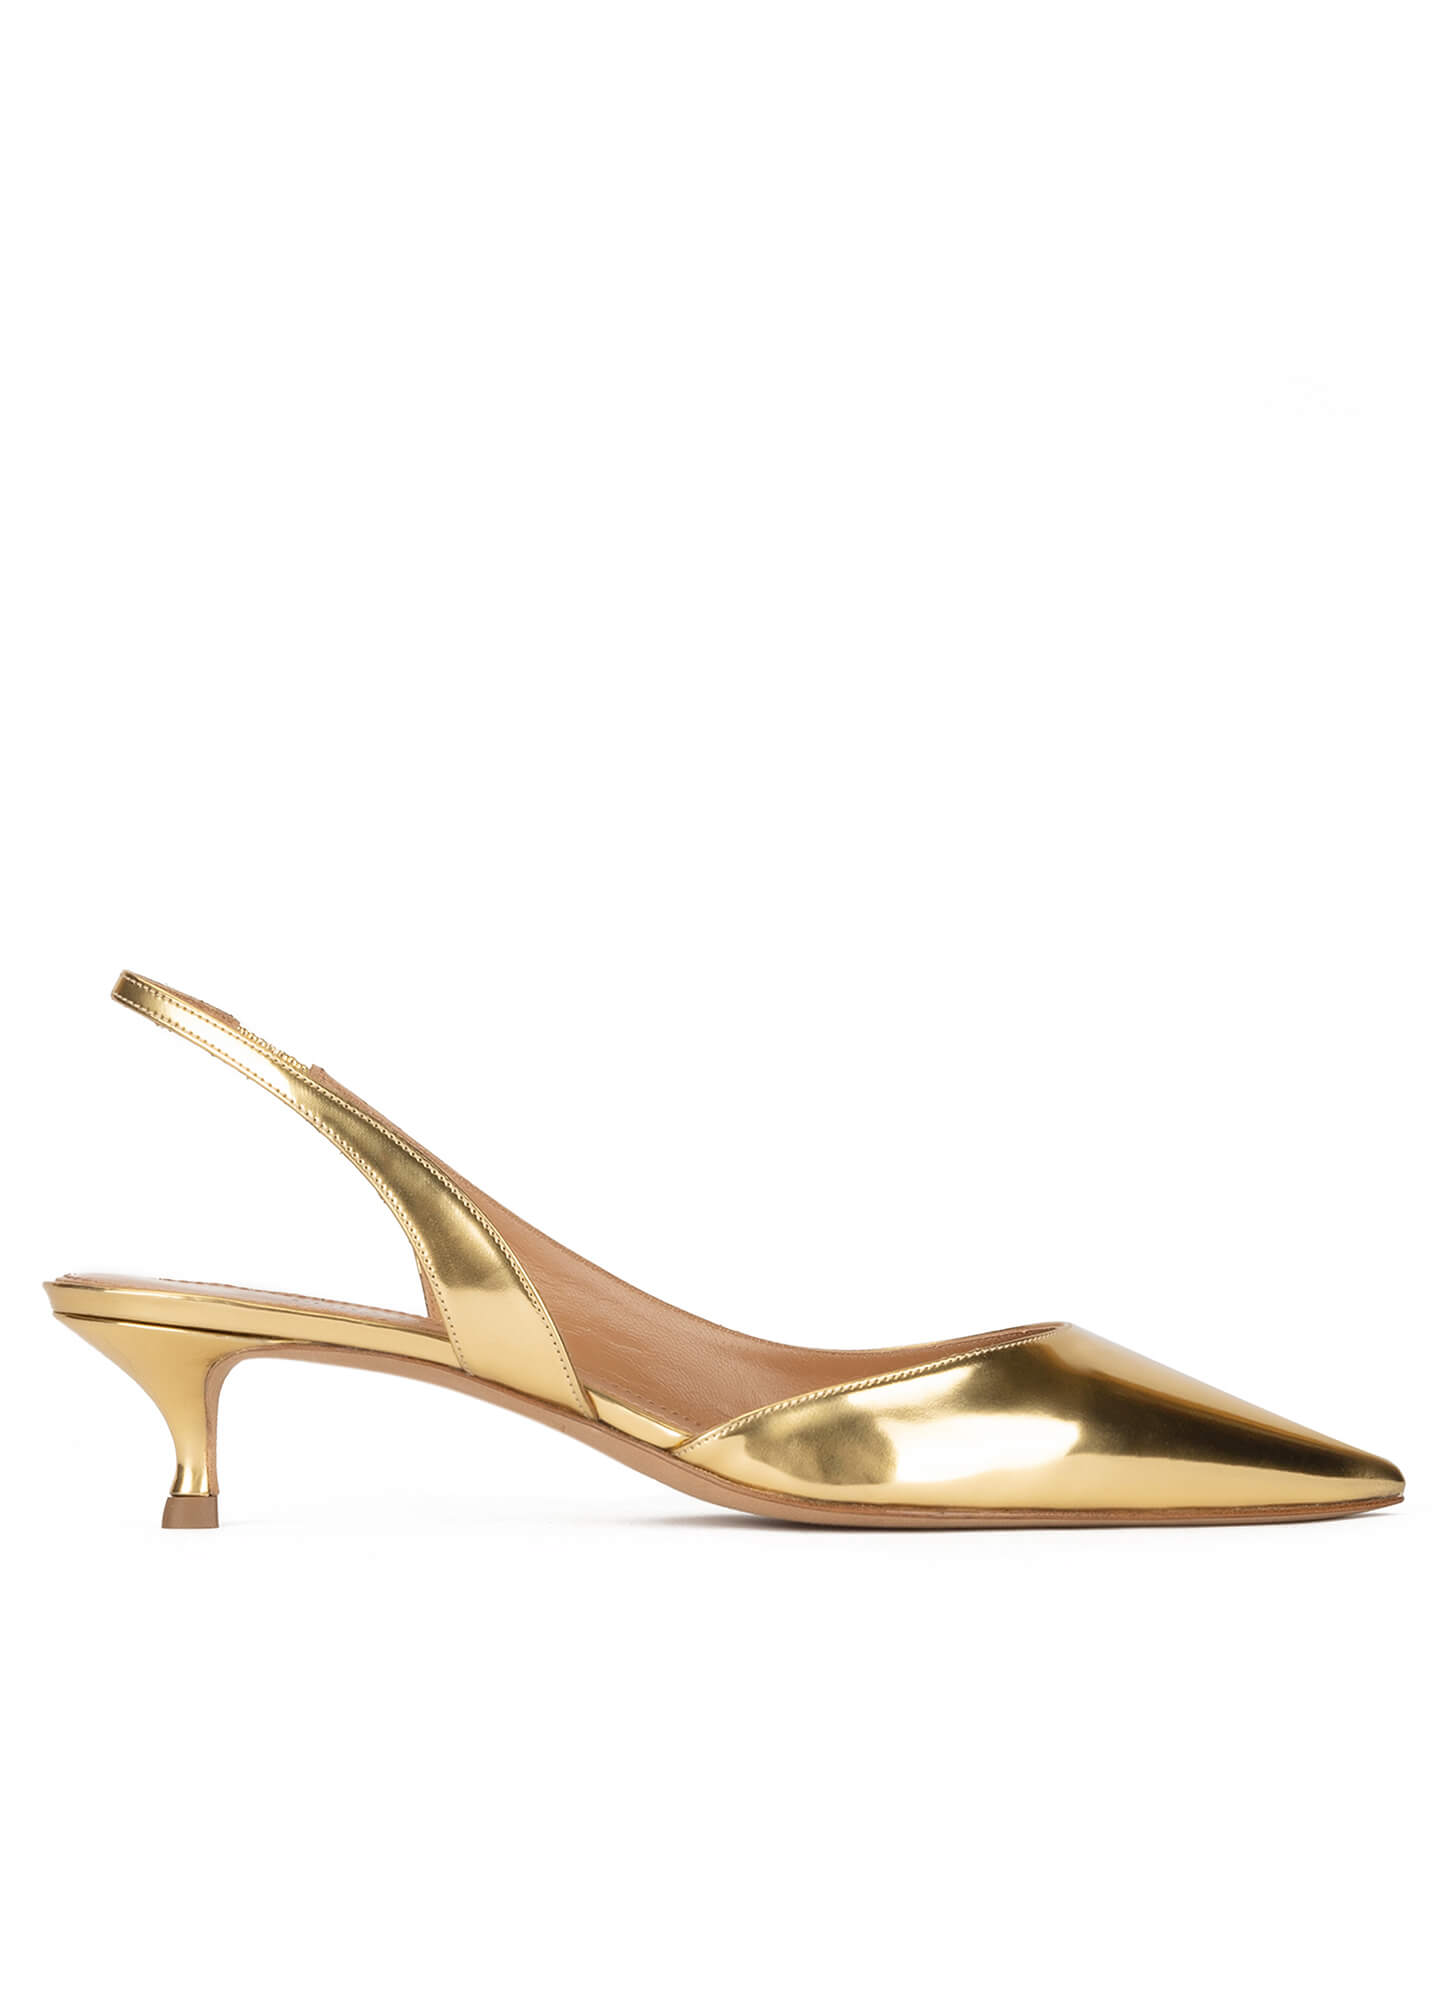 Slingback pumps in gold mirrored leather . PURA LOPEZ